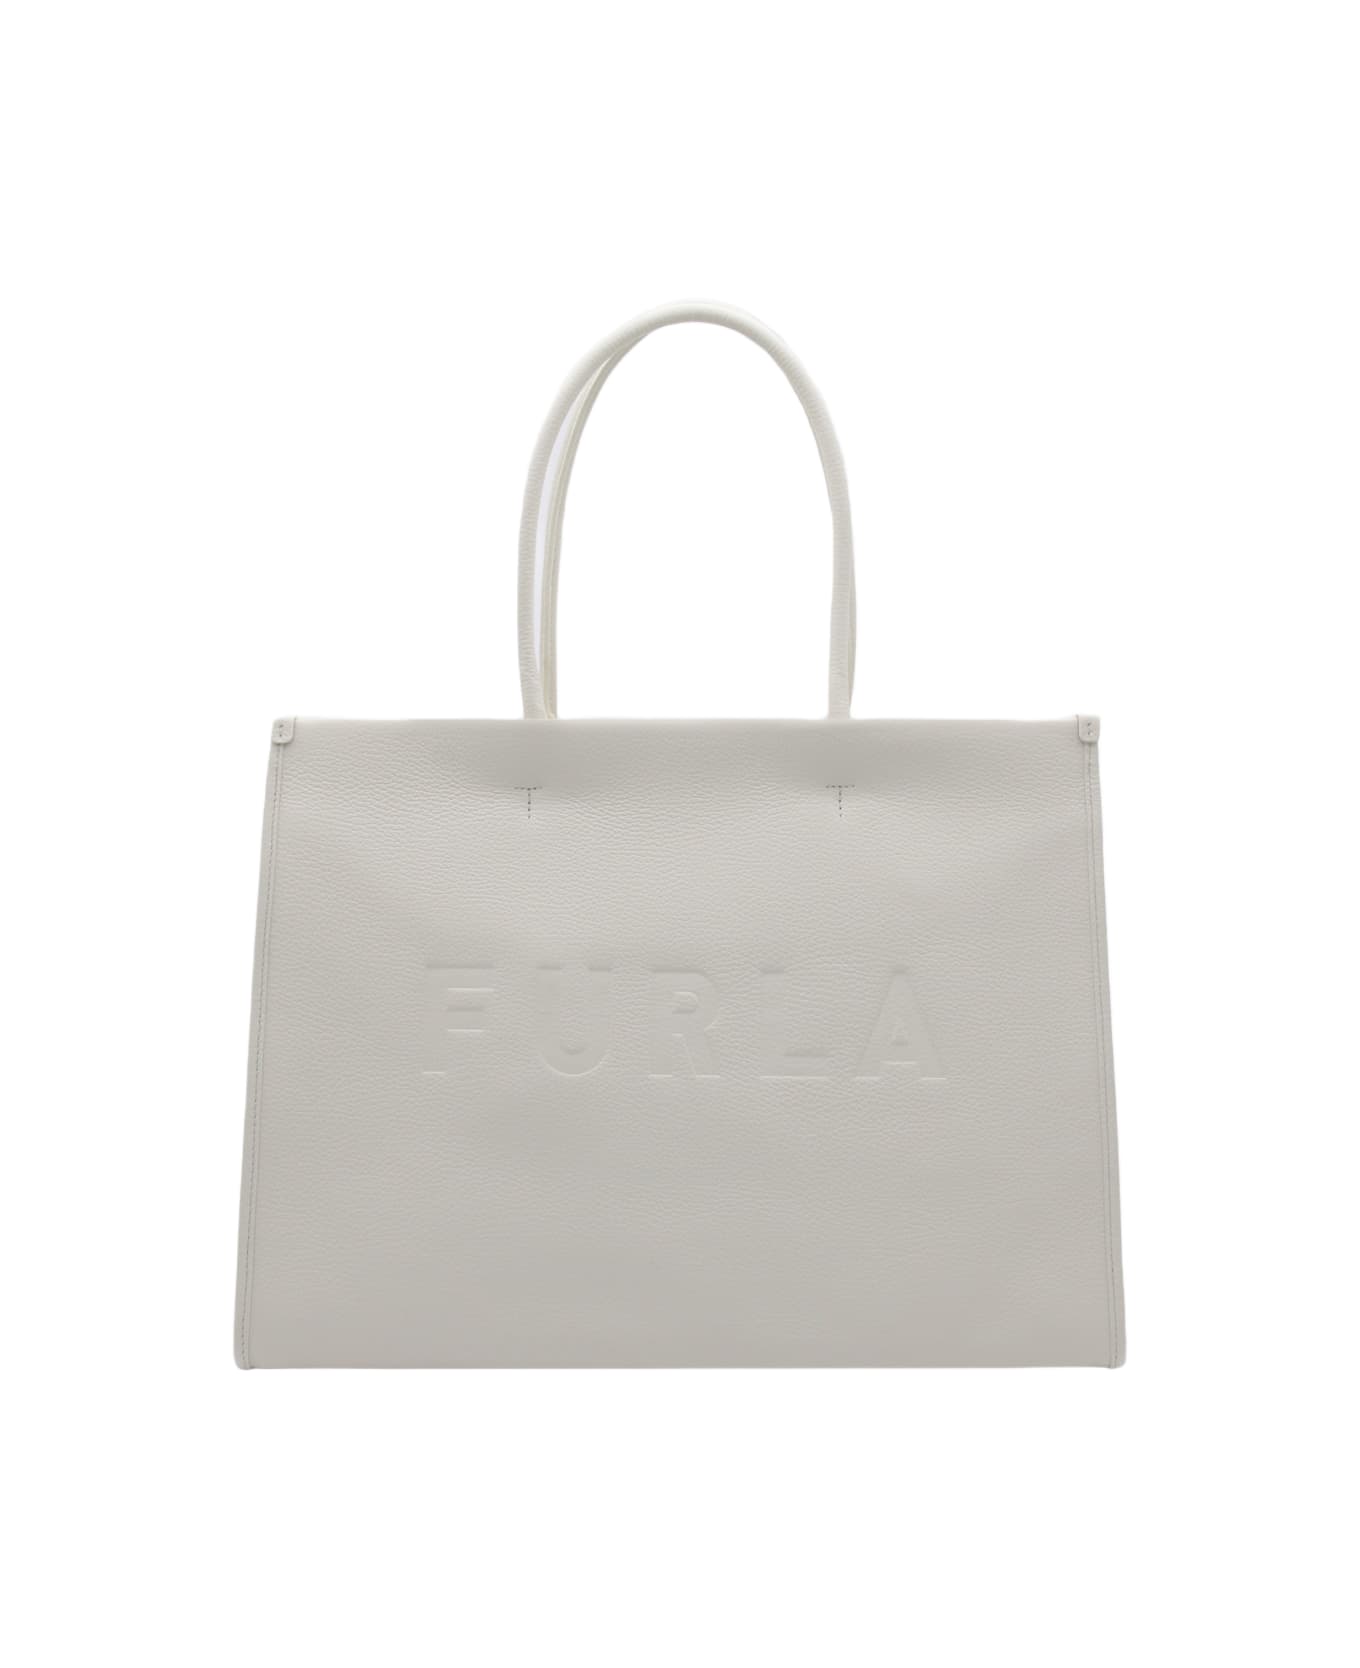 Furla Marshmallow Leather Opportunity Tote Bag - White/Black トートバッグ